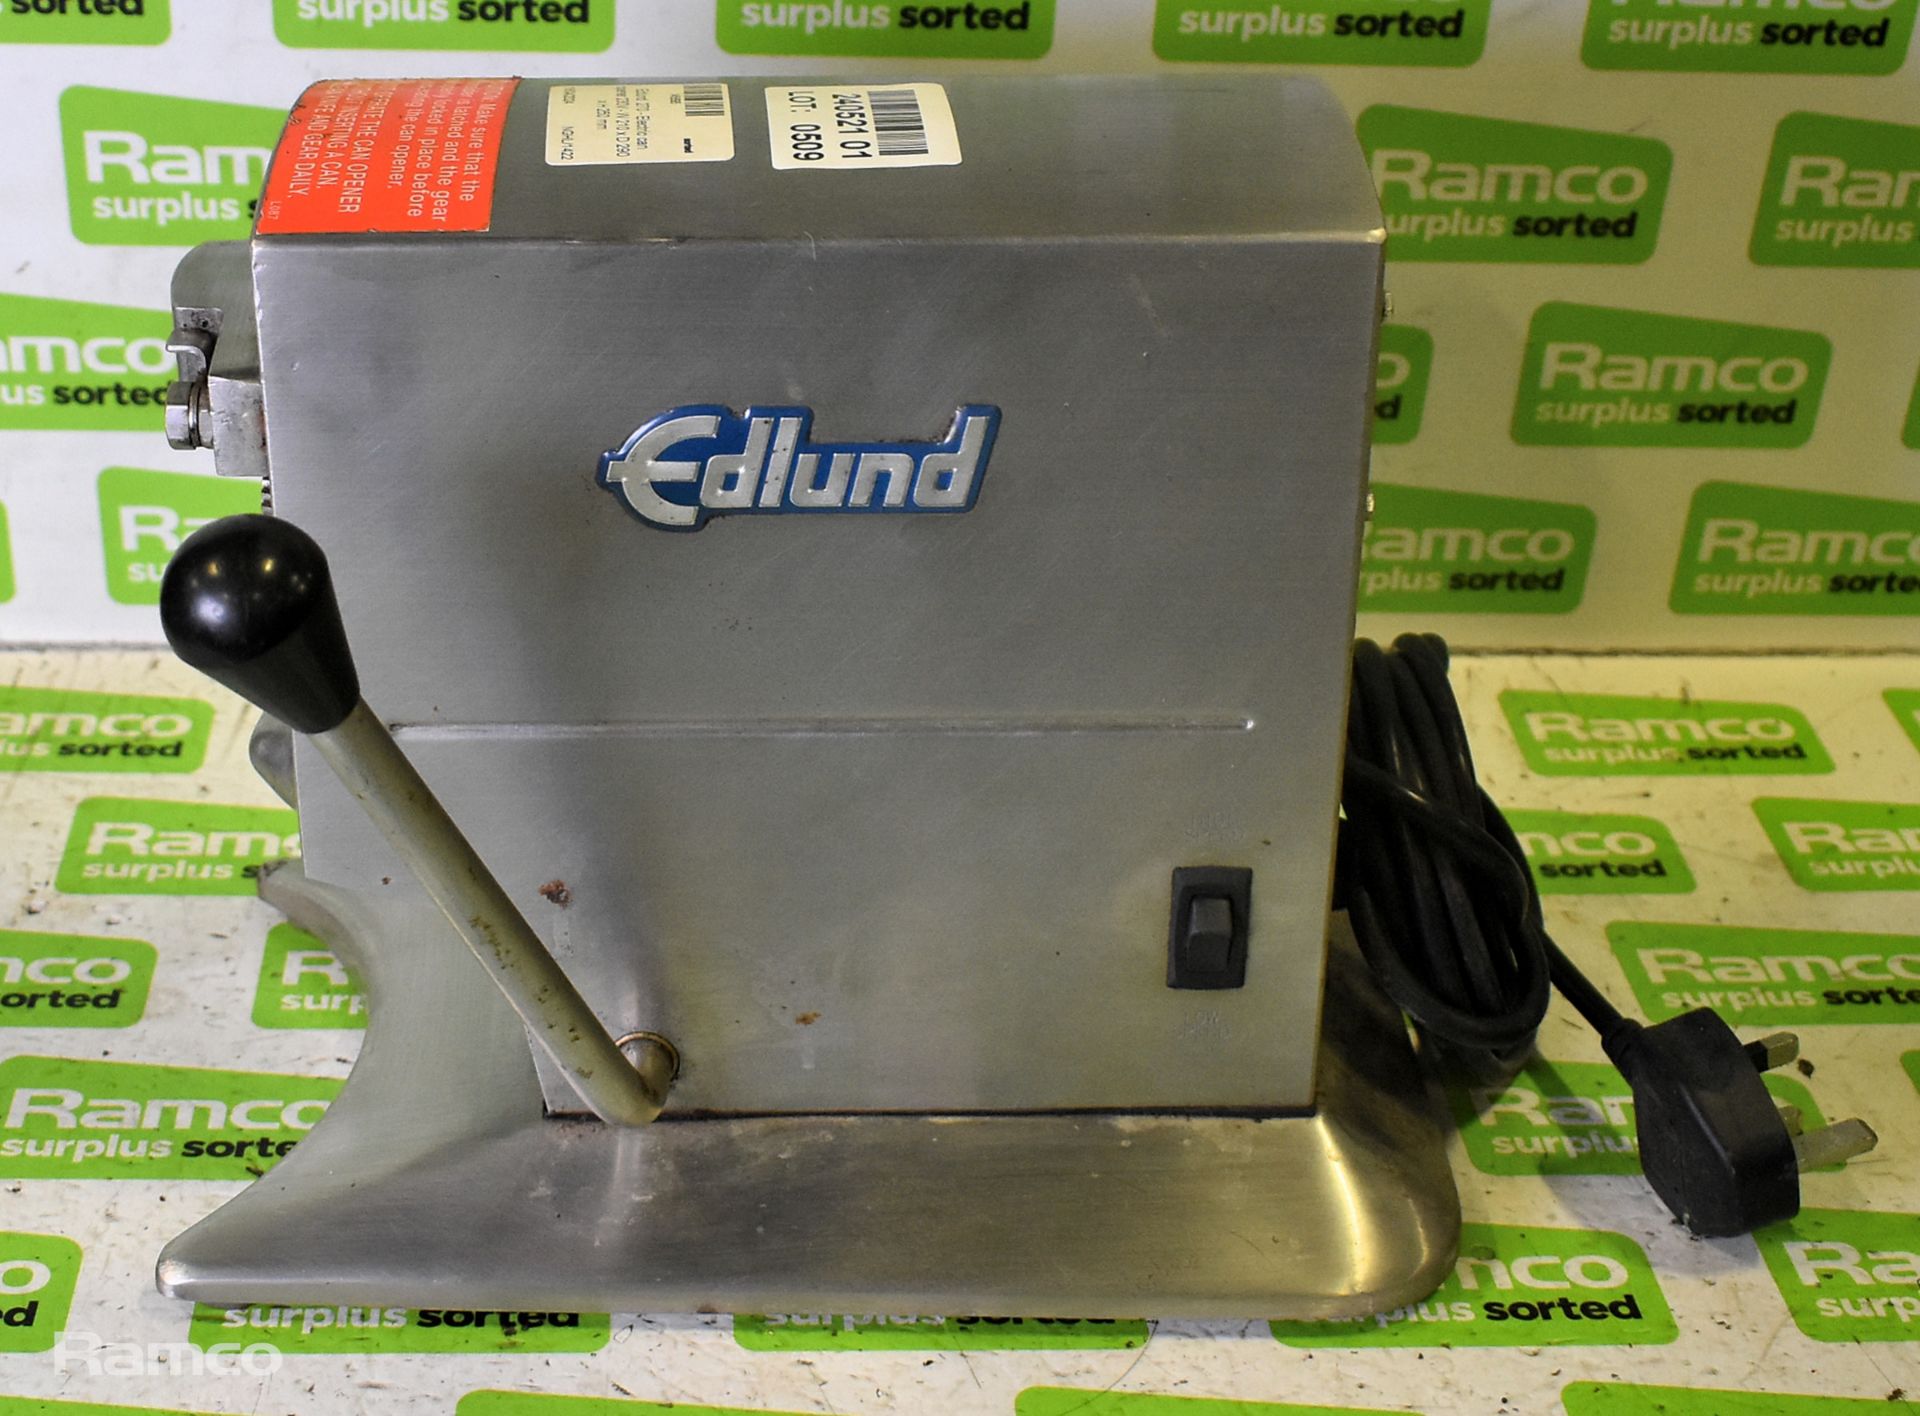 Edlund 270 Electric can opener - 230V - W 210 x D 290 x H 250mm - Image 4 of 5